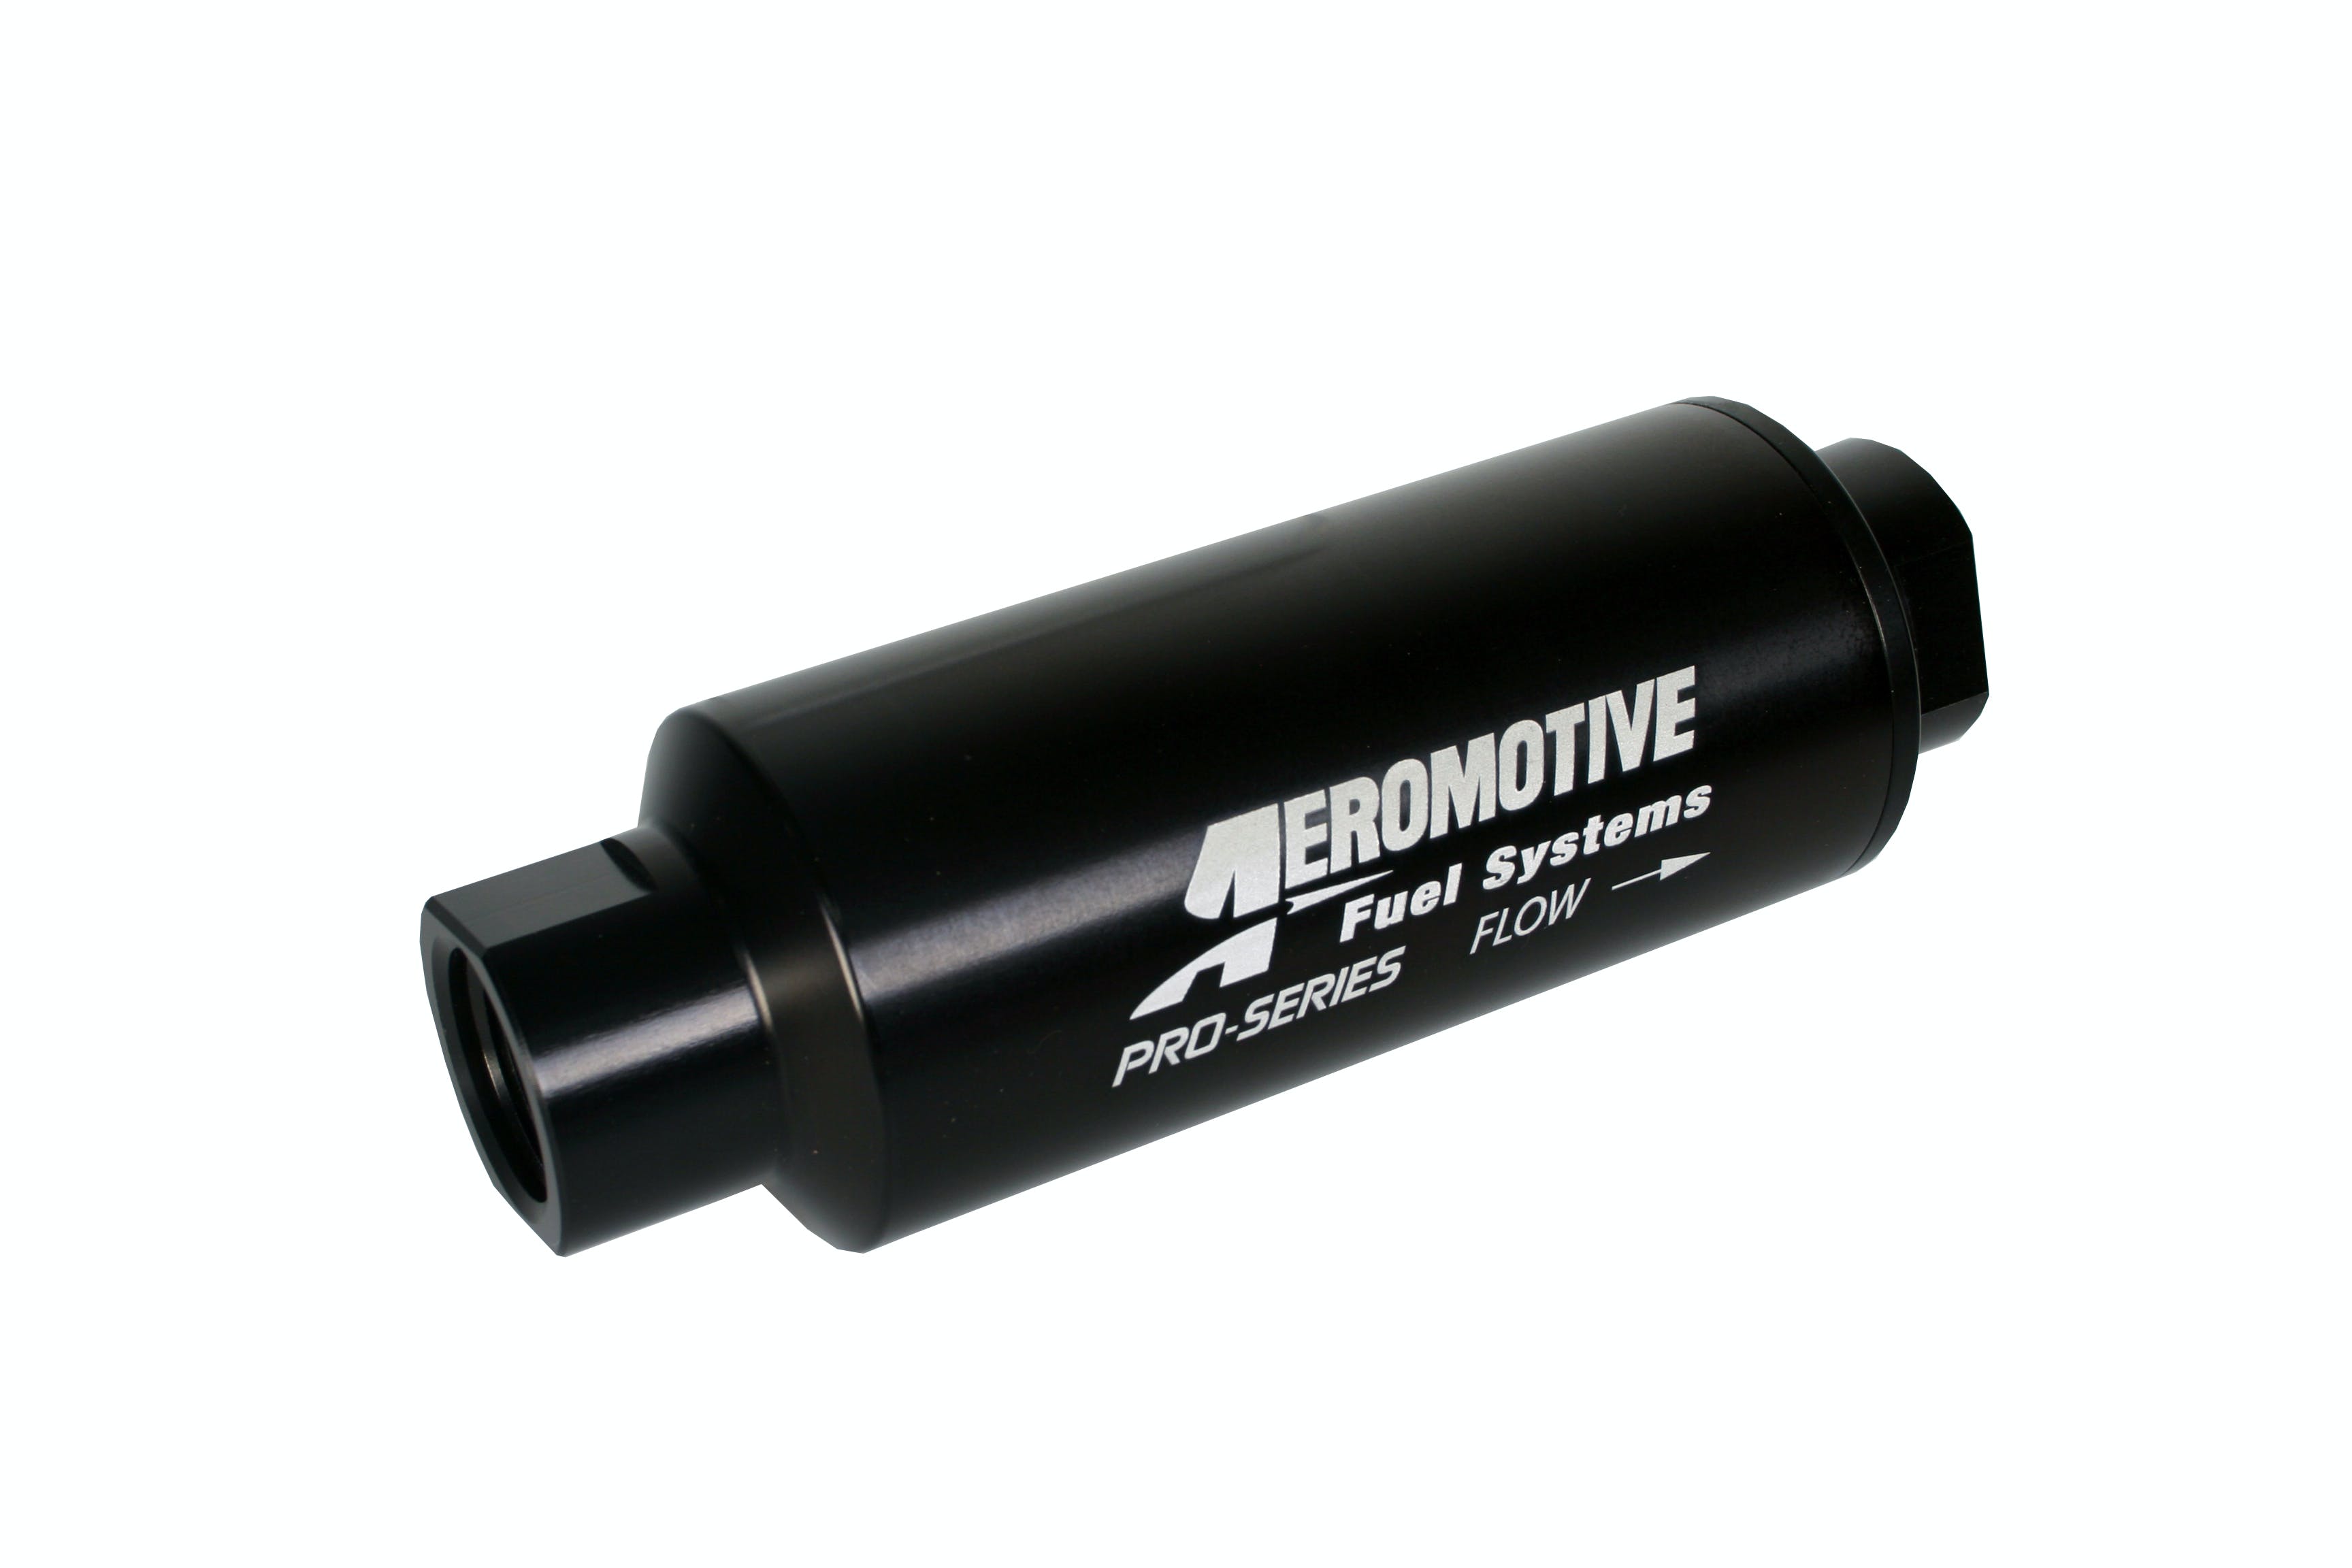 Aeromotive Fuel System 12302 Pro-Series, In-Line Fuel Filter (AN-12) 100 micron stainless steel element